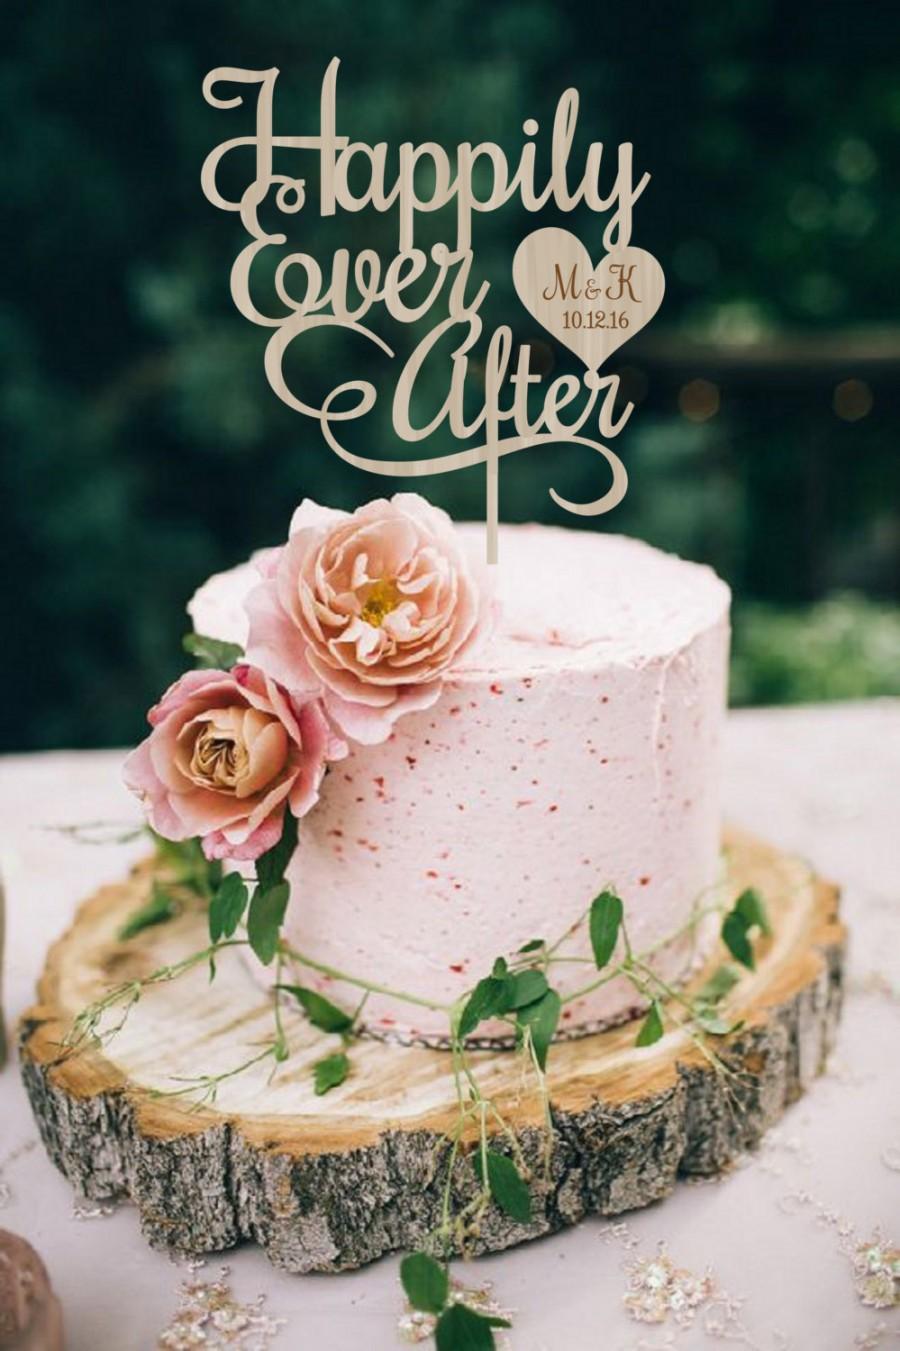 Hochzeit - Happily Ever After  Wedding Cake Topper Rustic Cake Topper  Personalized  Wood Cake Topper Silver Gold Cake Topper